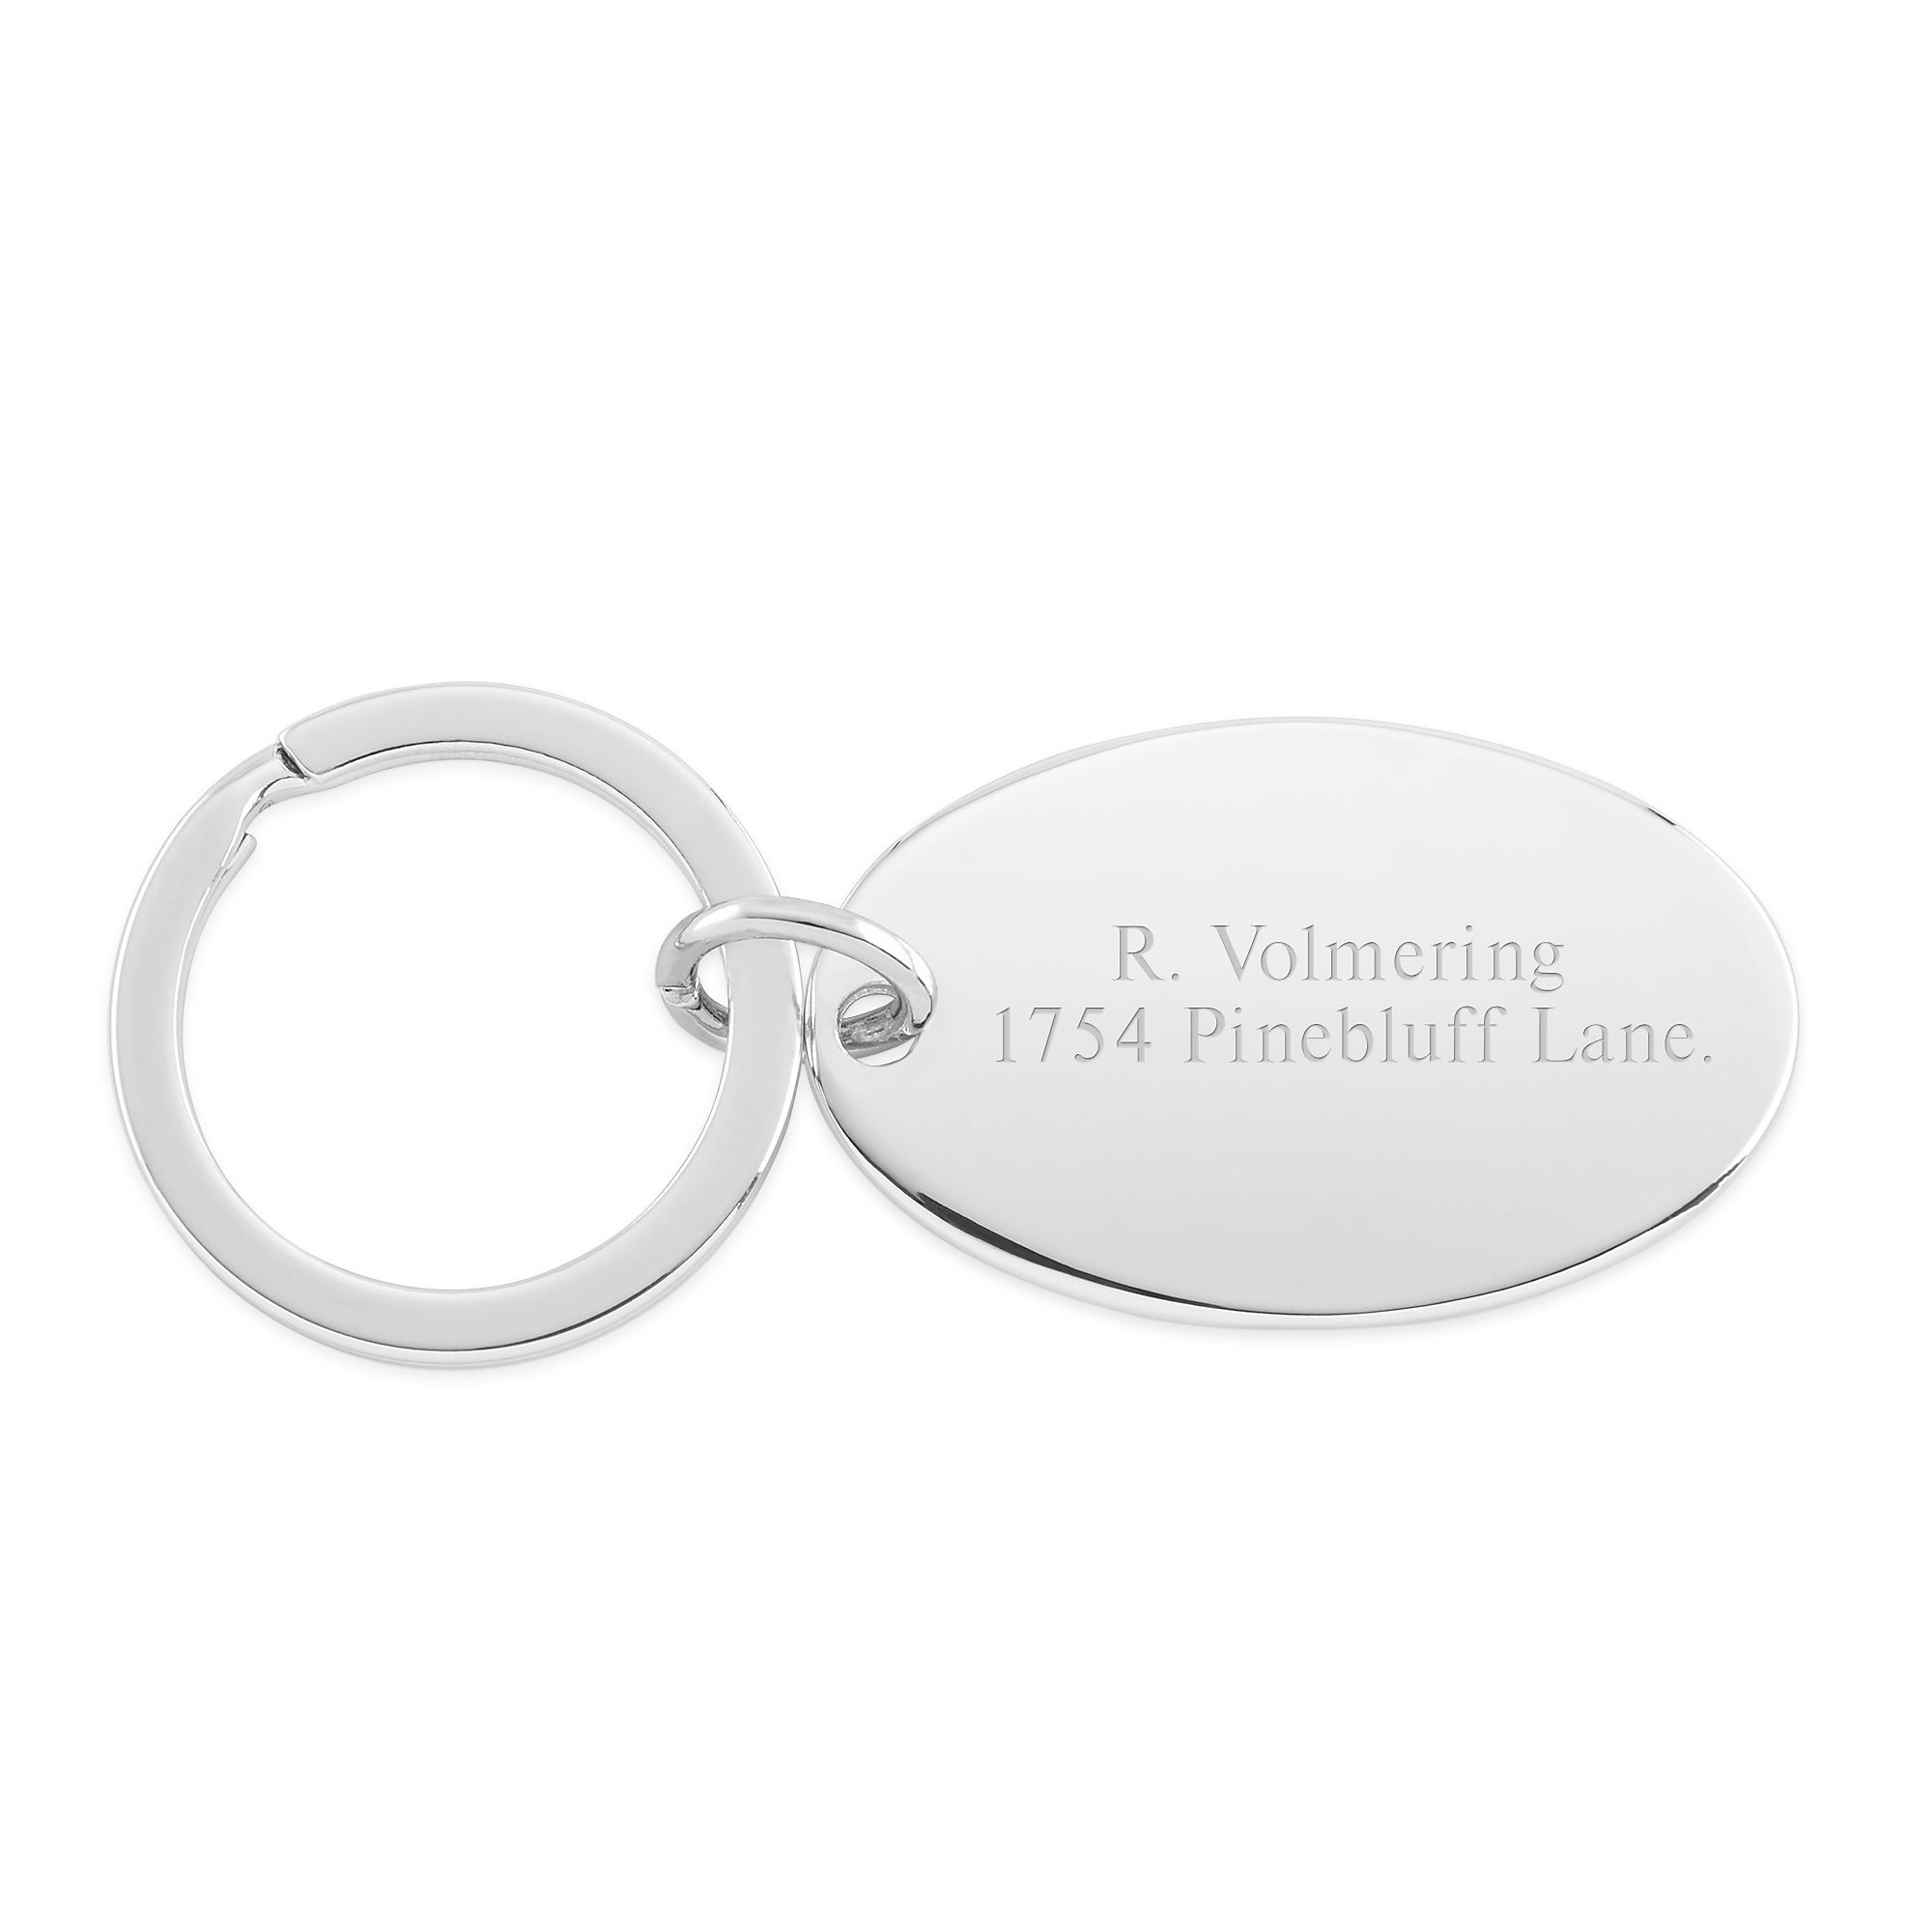 Off Road Racer Oval Keychain Personalized Engraving Included Black 